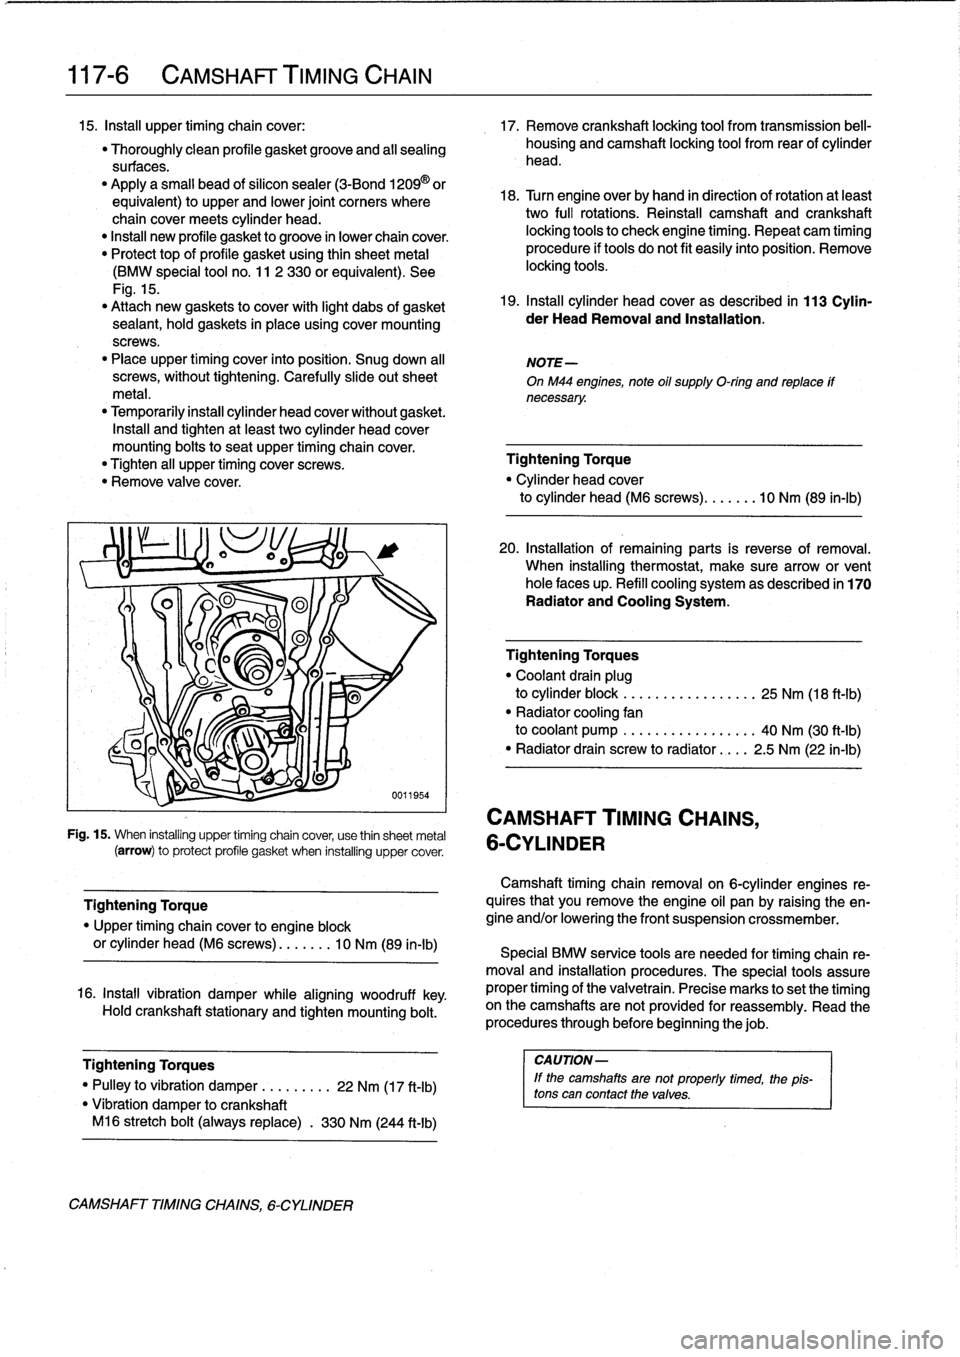 BMW 318i 1997 E36 Owners Manual 
117-
6

	

CAMSHAFT
TIMING
CHAIN

15
.
Insta¡¡
upper
timing
chaincover
:

	

17
.
Remove
crankshaft
locking
tool
from
transmission
bell-

"
Thoroughly
clean
profile
gasketgroove
and
all
sealing

	
